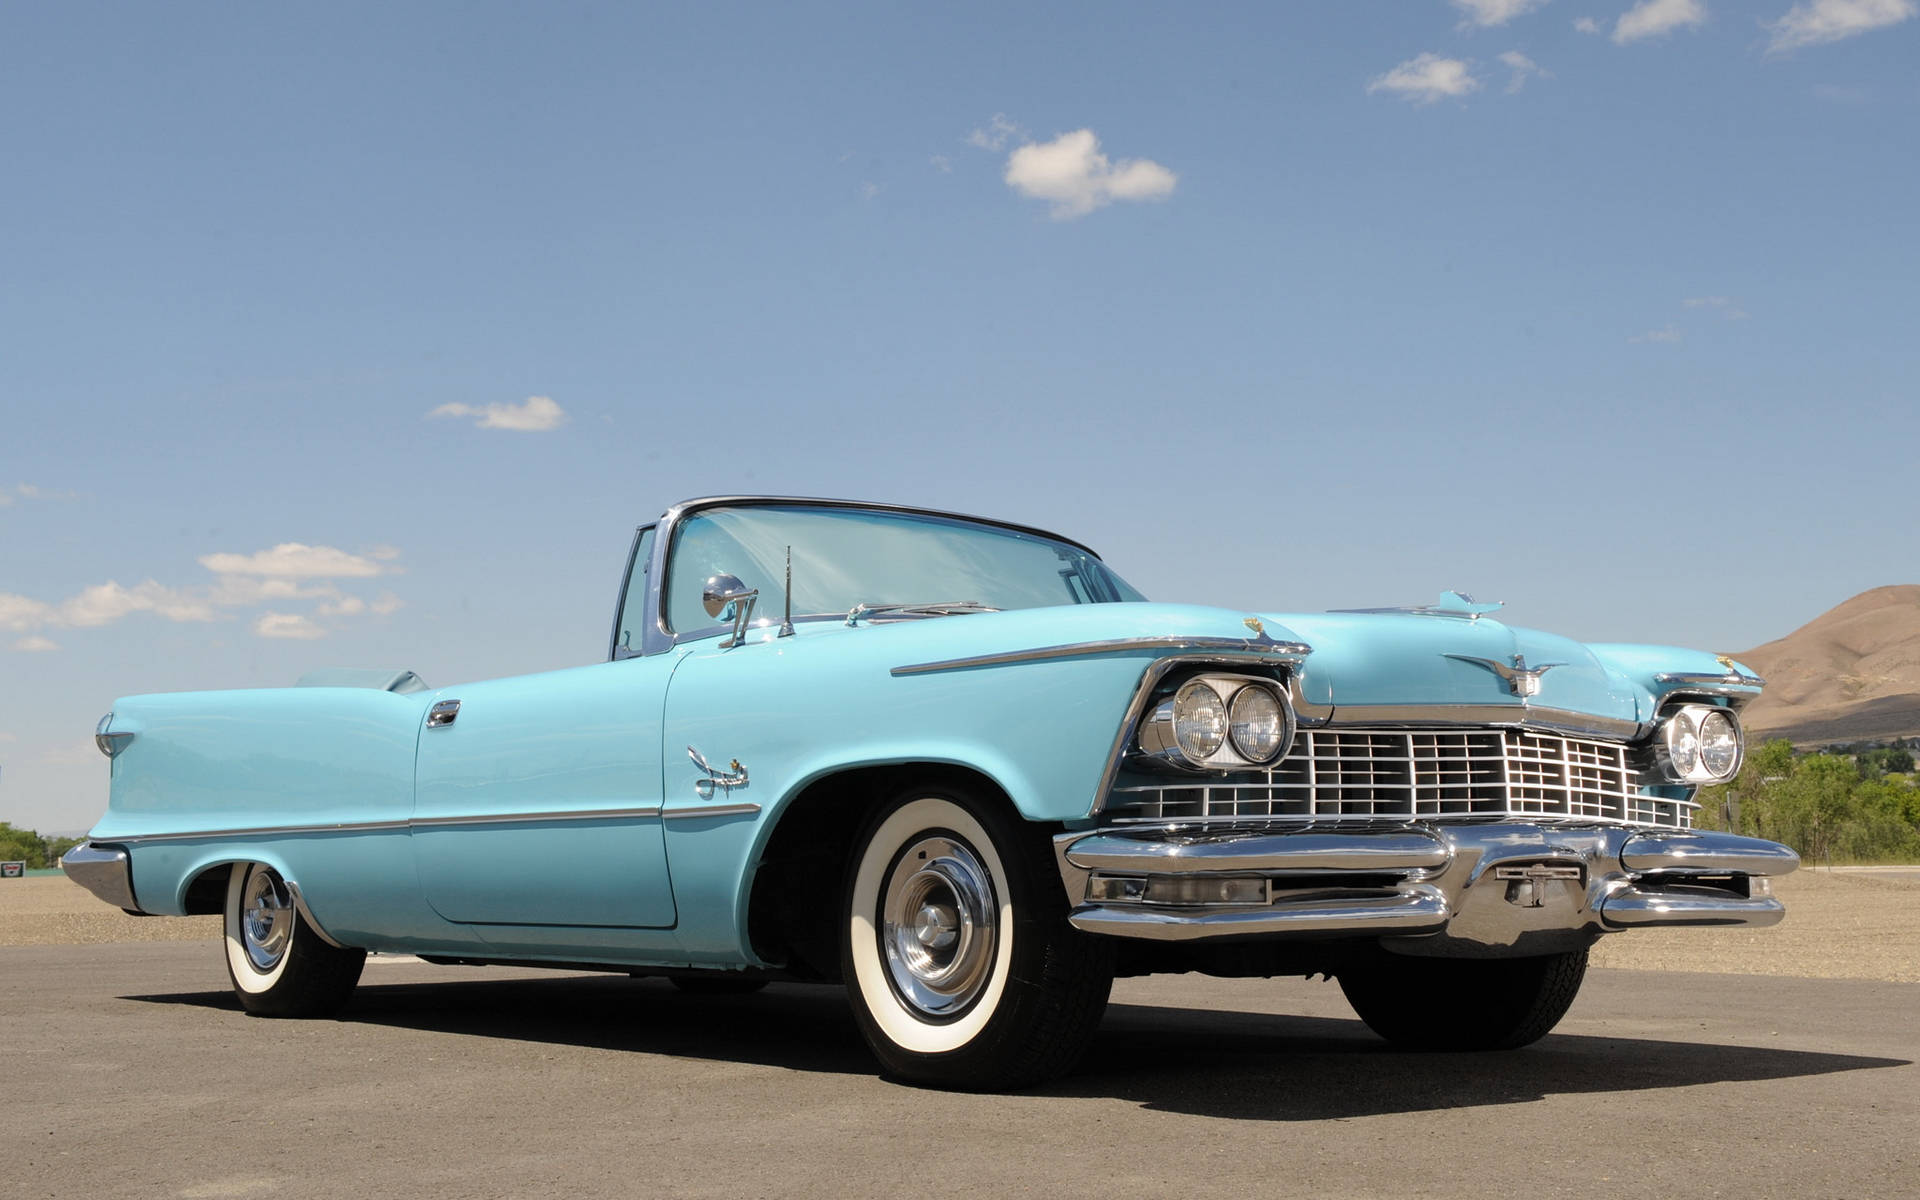 Exquisite 1958 Chrysler Imperial Convertible Background